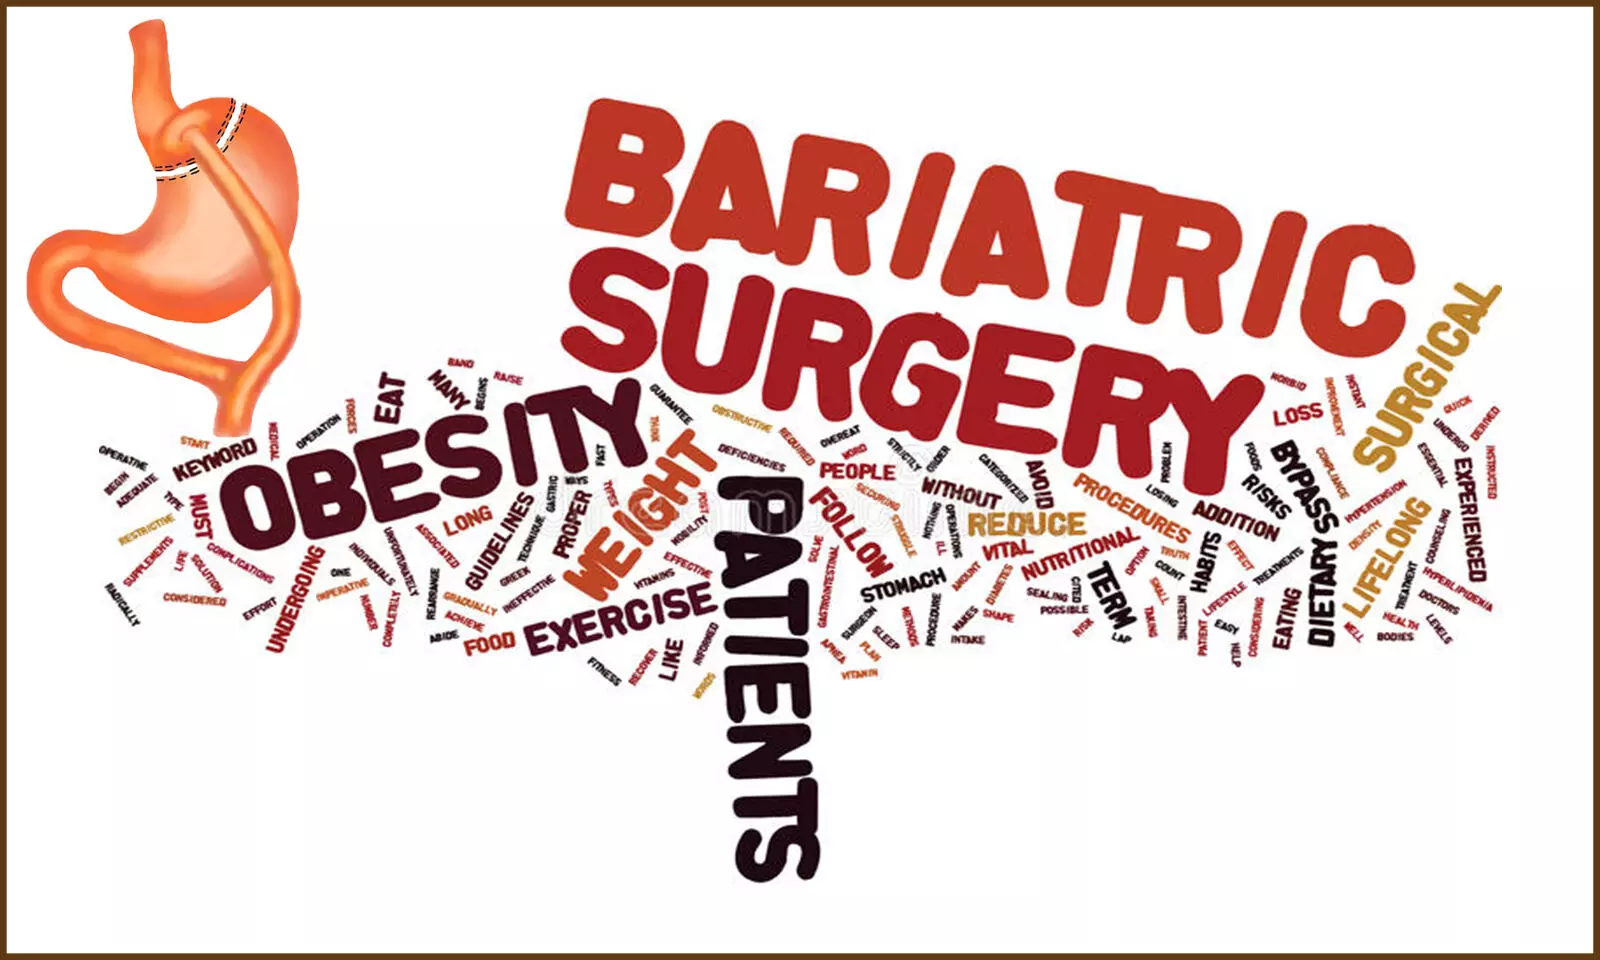 Bariatric surgery tied to weight loss and metabolic benefits in teenagers as well